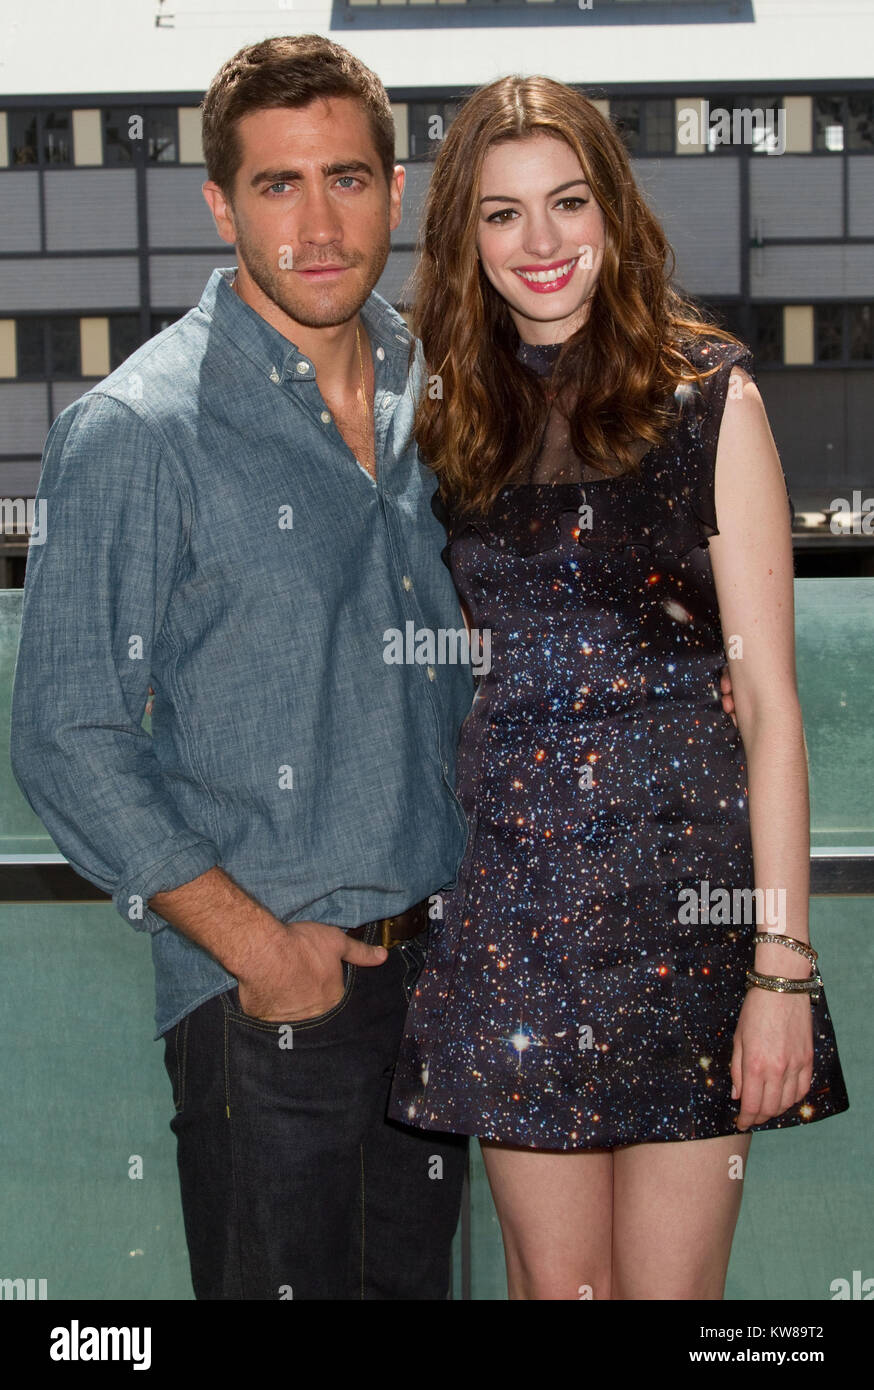 SYDNEY, AUSTRALIA - DECEMBER 06: Anne Hathaway and Jake Gyllenhaal pose during the 'Love & Other Drugs' Press Conference at the Wharf Theatre on December 6, 2010 in Sydney, Australia   People:  Anne Hathaway Jake Gyllenhaal  Transmission Ref:  MNCAU1 Stock Photo